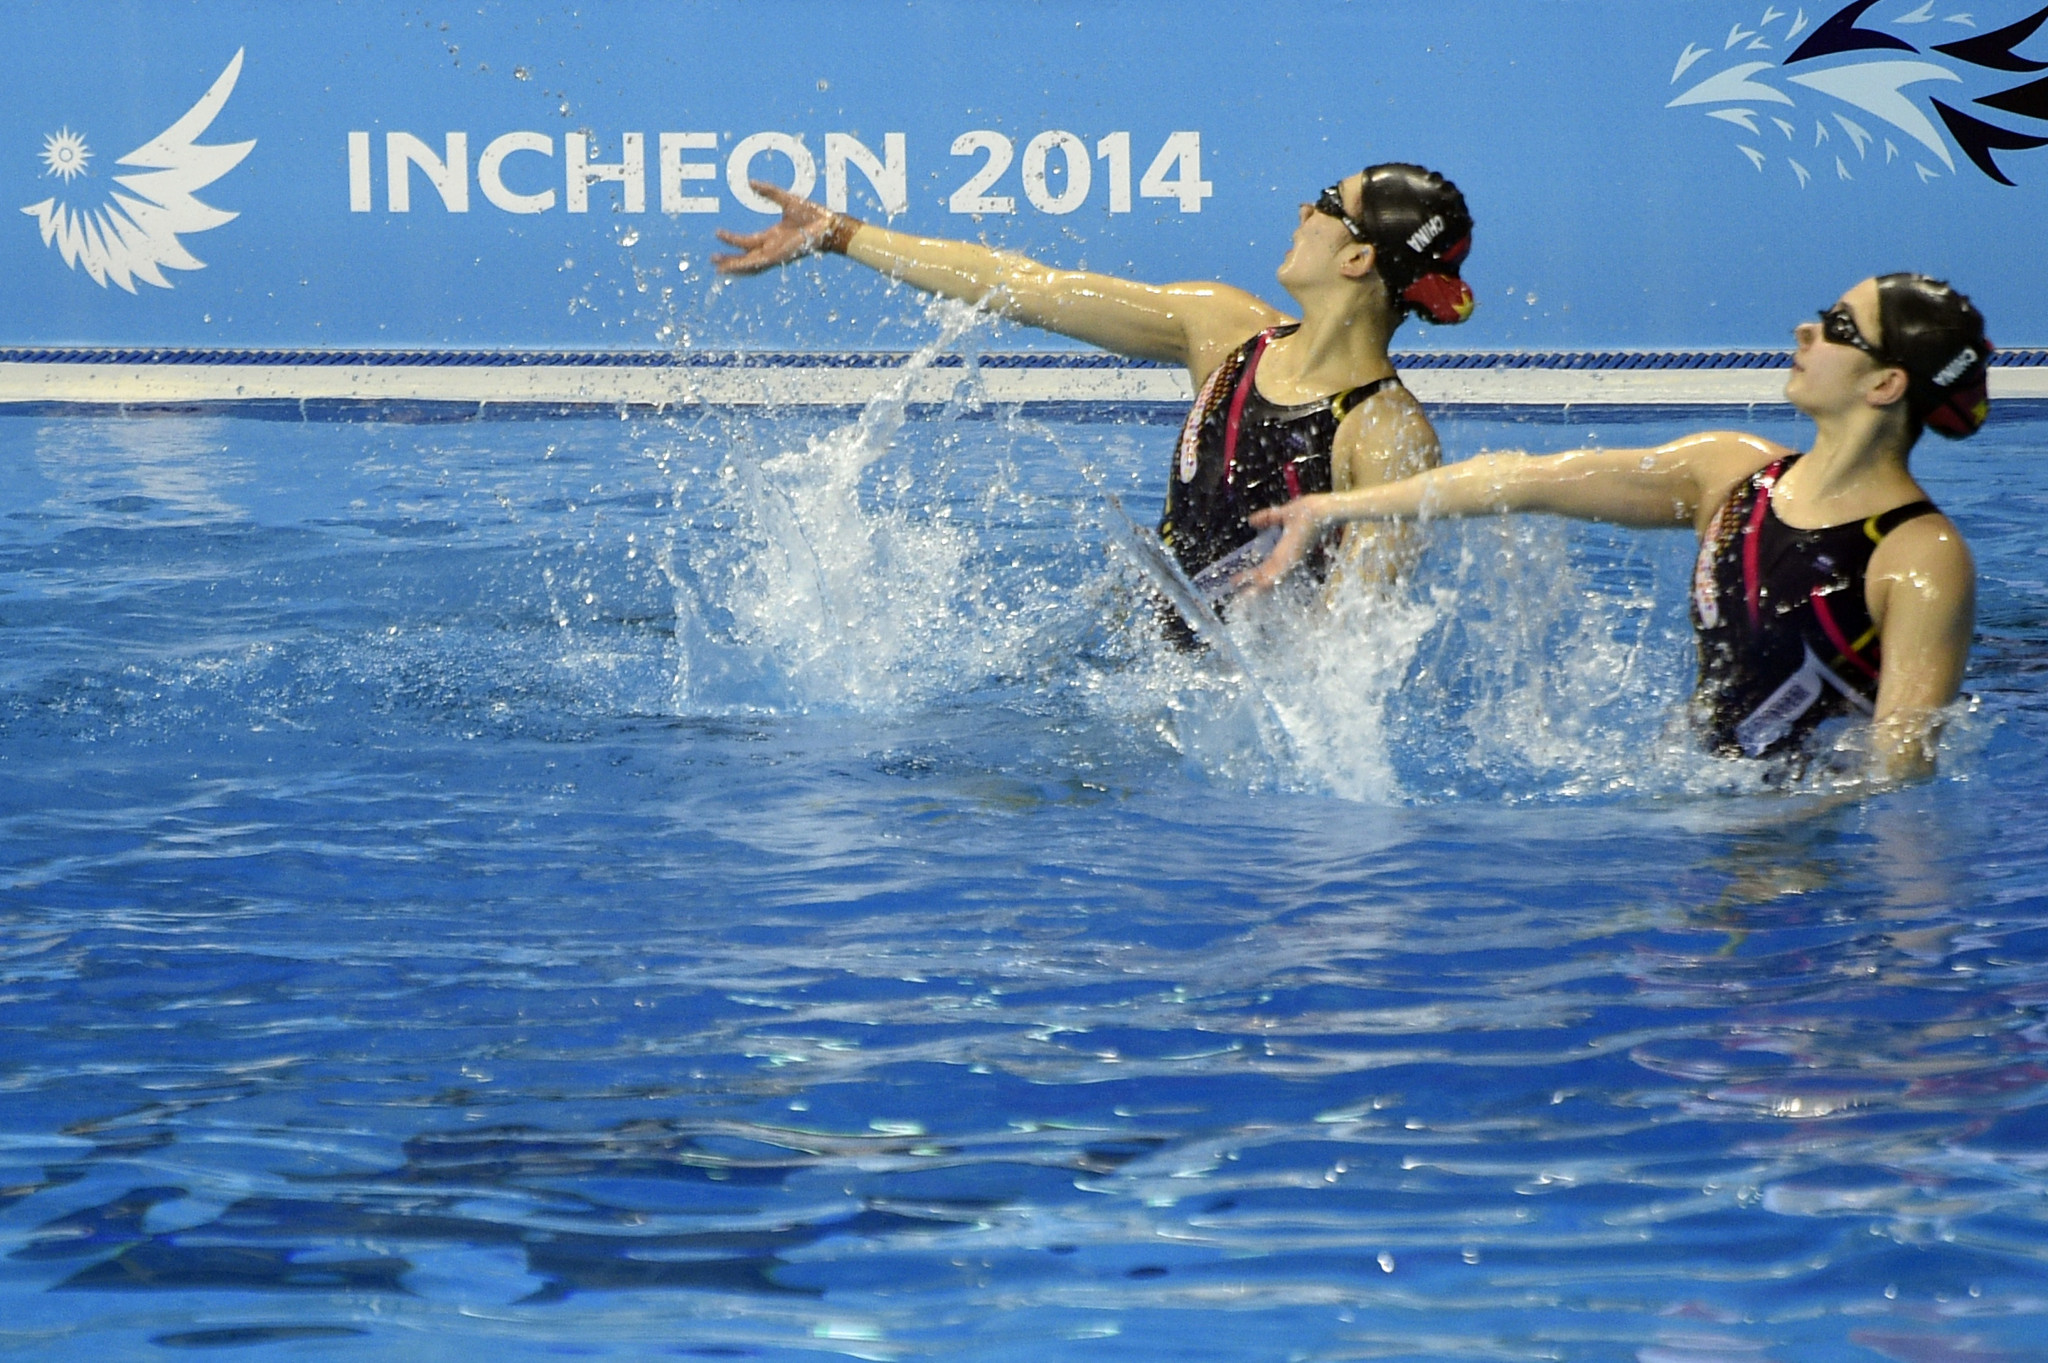 Incheon in South Korea hosted the last Summer Asian Games in 2014 ©Getty Images